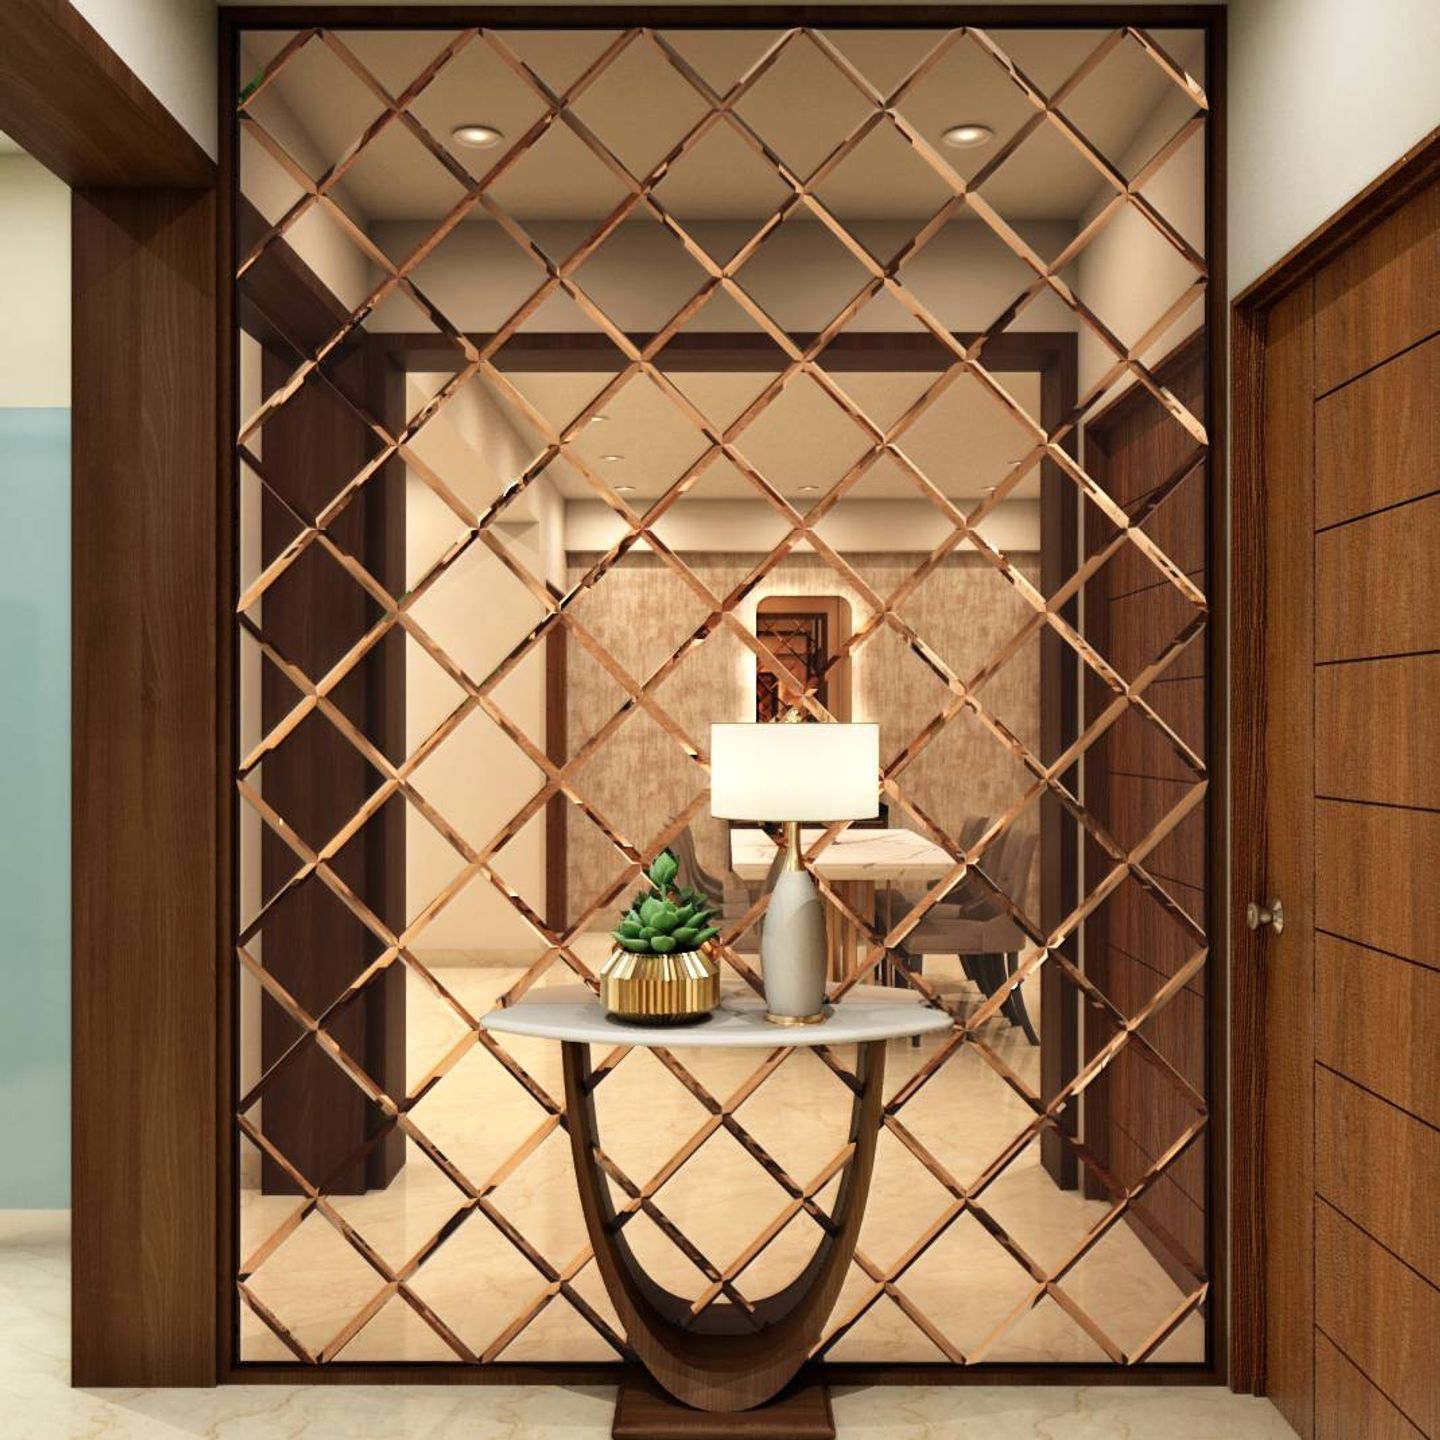 Foyer Design With Criss-Cross Metal Partition - Livspace